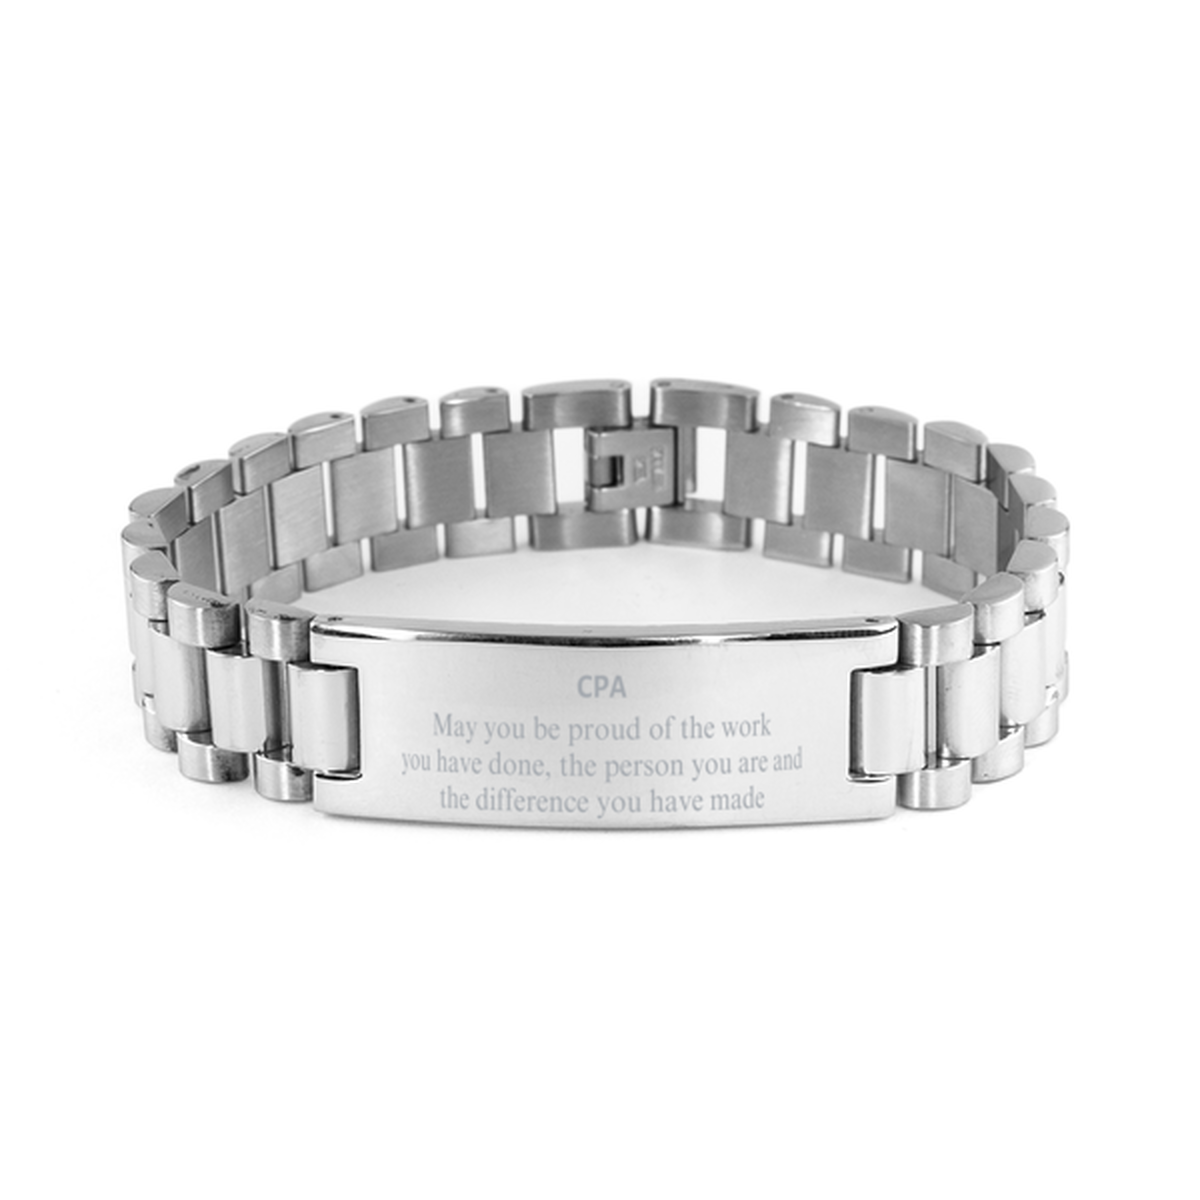 CPA May you be proud of the work you have done, Retirement CPA Ladder Stainless Steel Bracelet for Colleague Appreciation Gifts Amazing for CPA